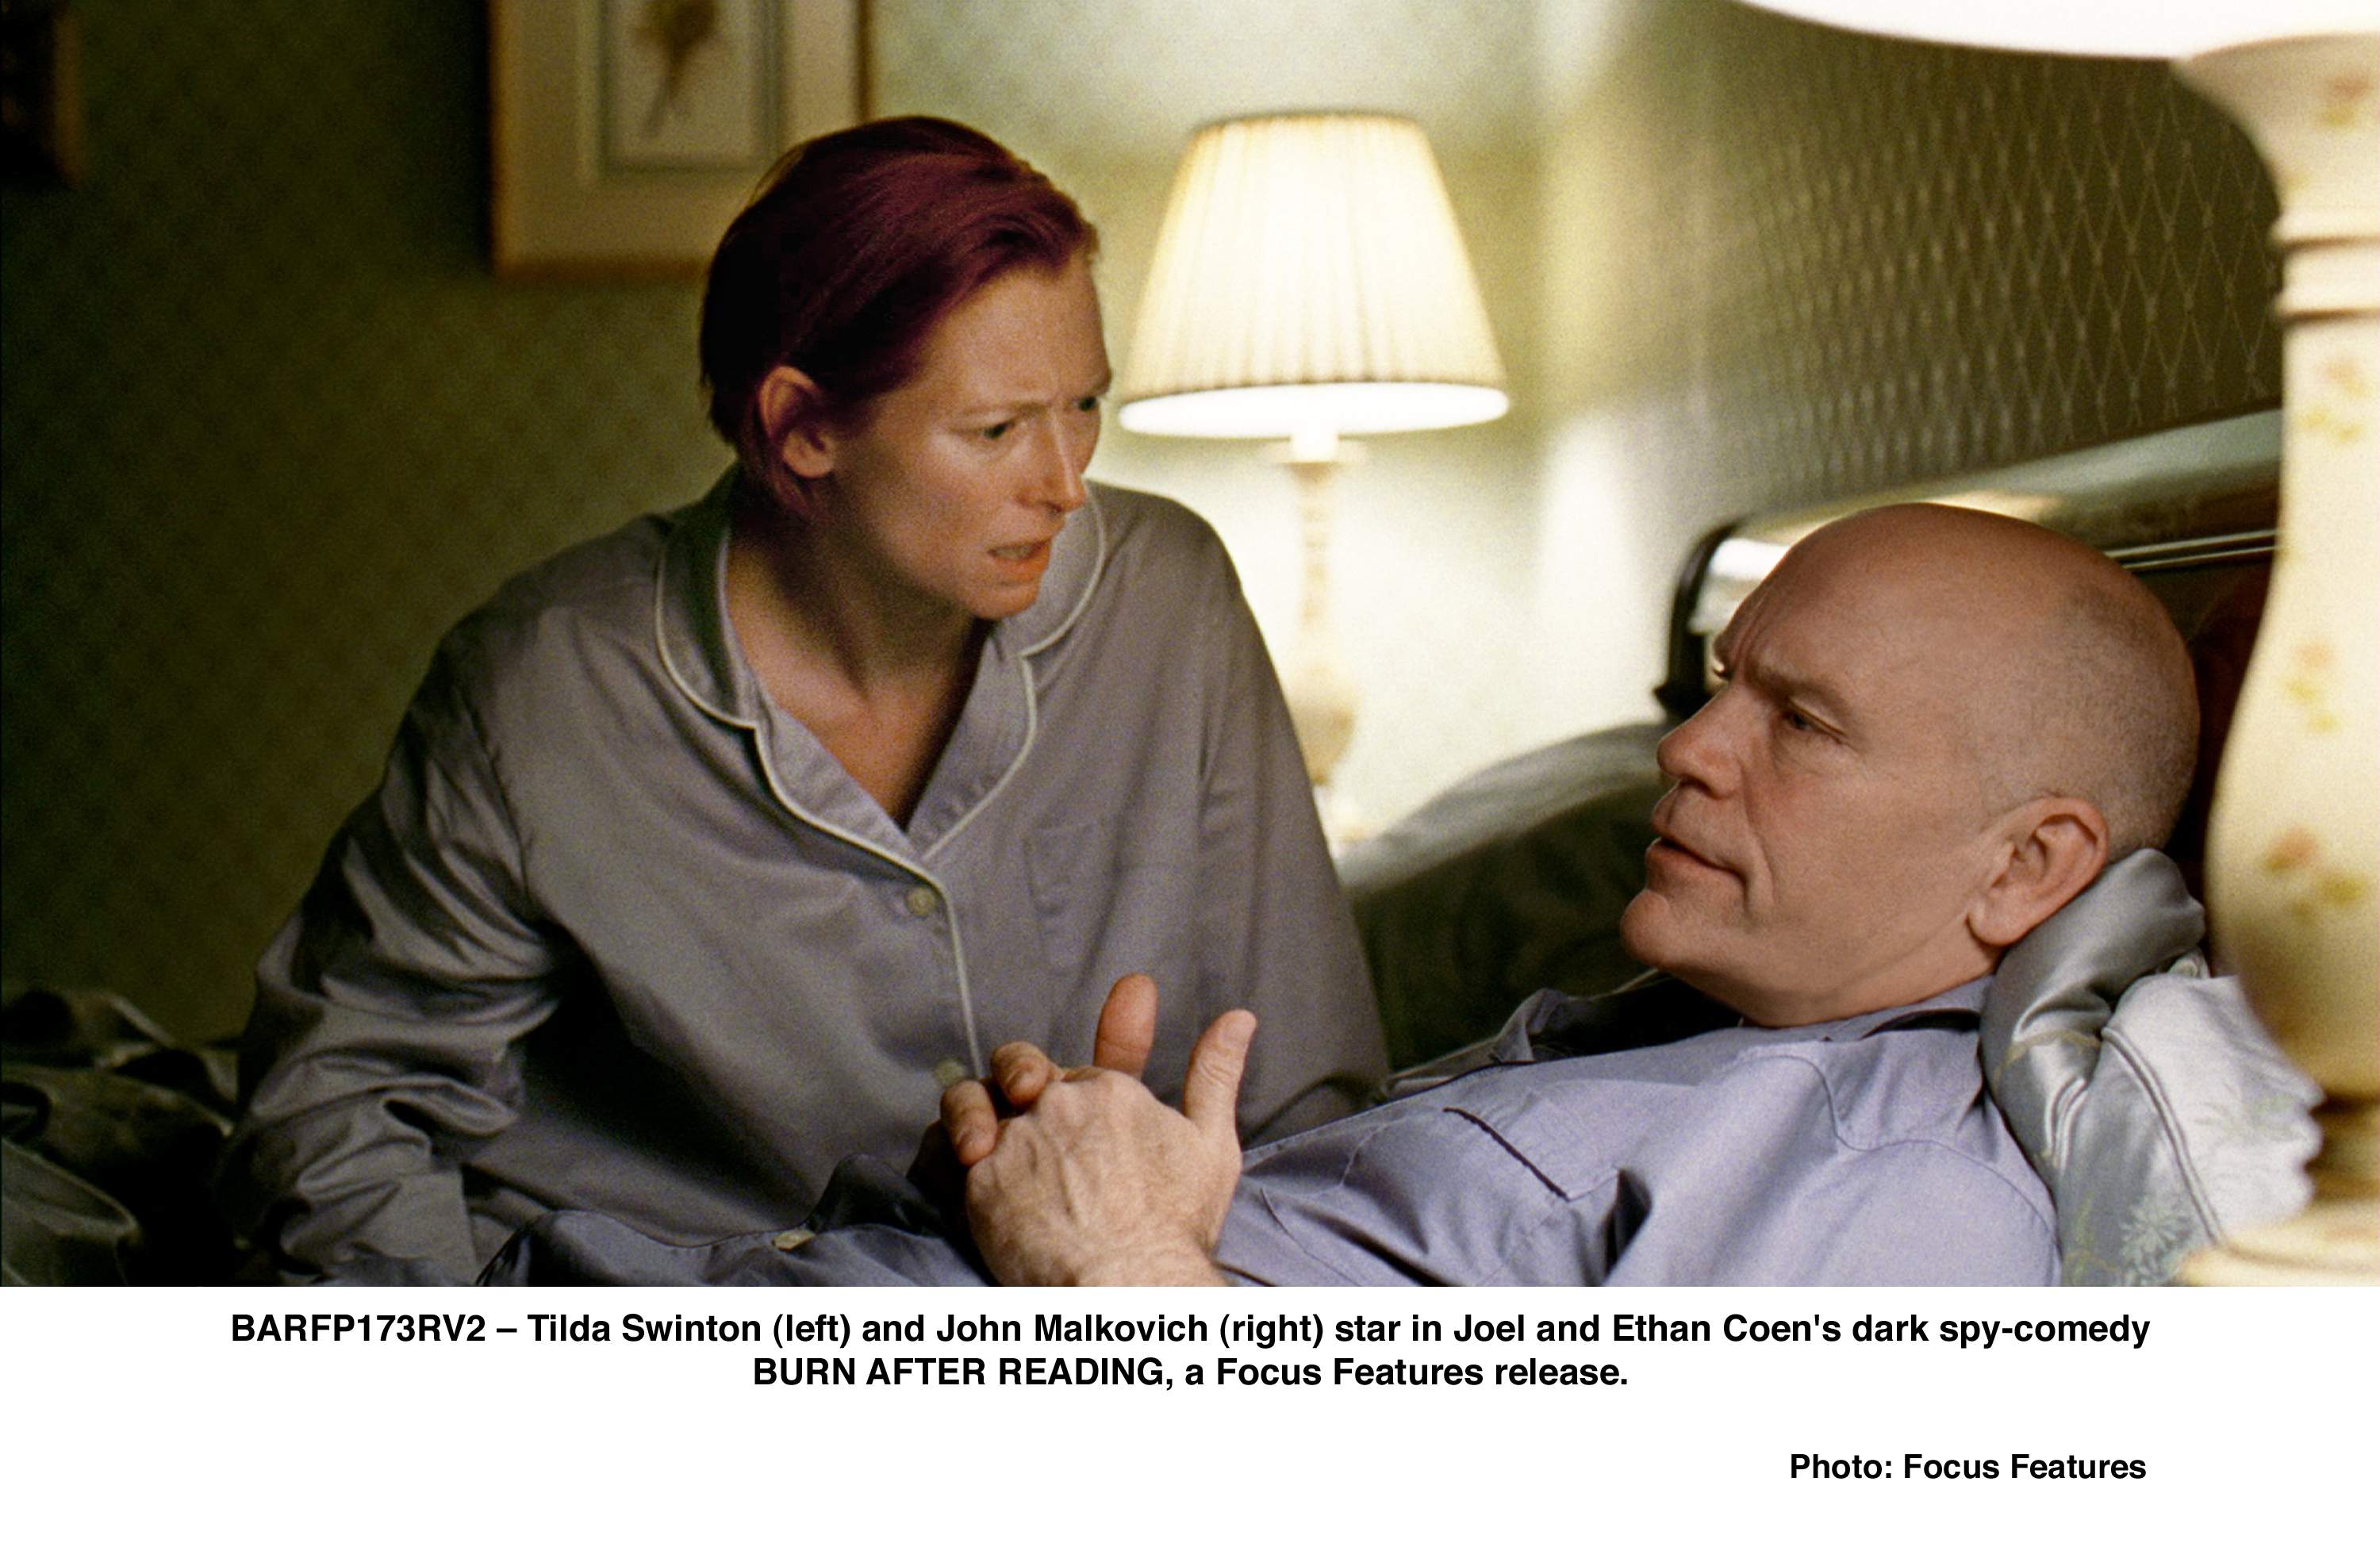 Tilda Swinton (left) and Richard Jenkins (right) star in Joel and Ethan Coen's dark spy-comedy BURN AFTER READING, a Focus Features release.